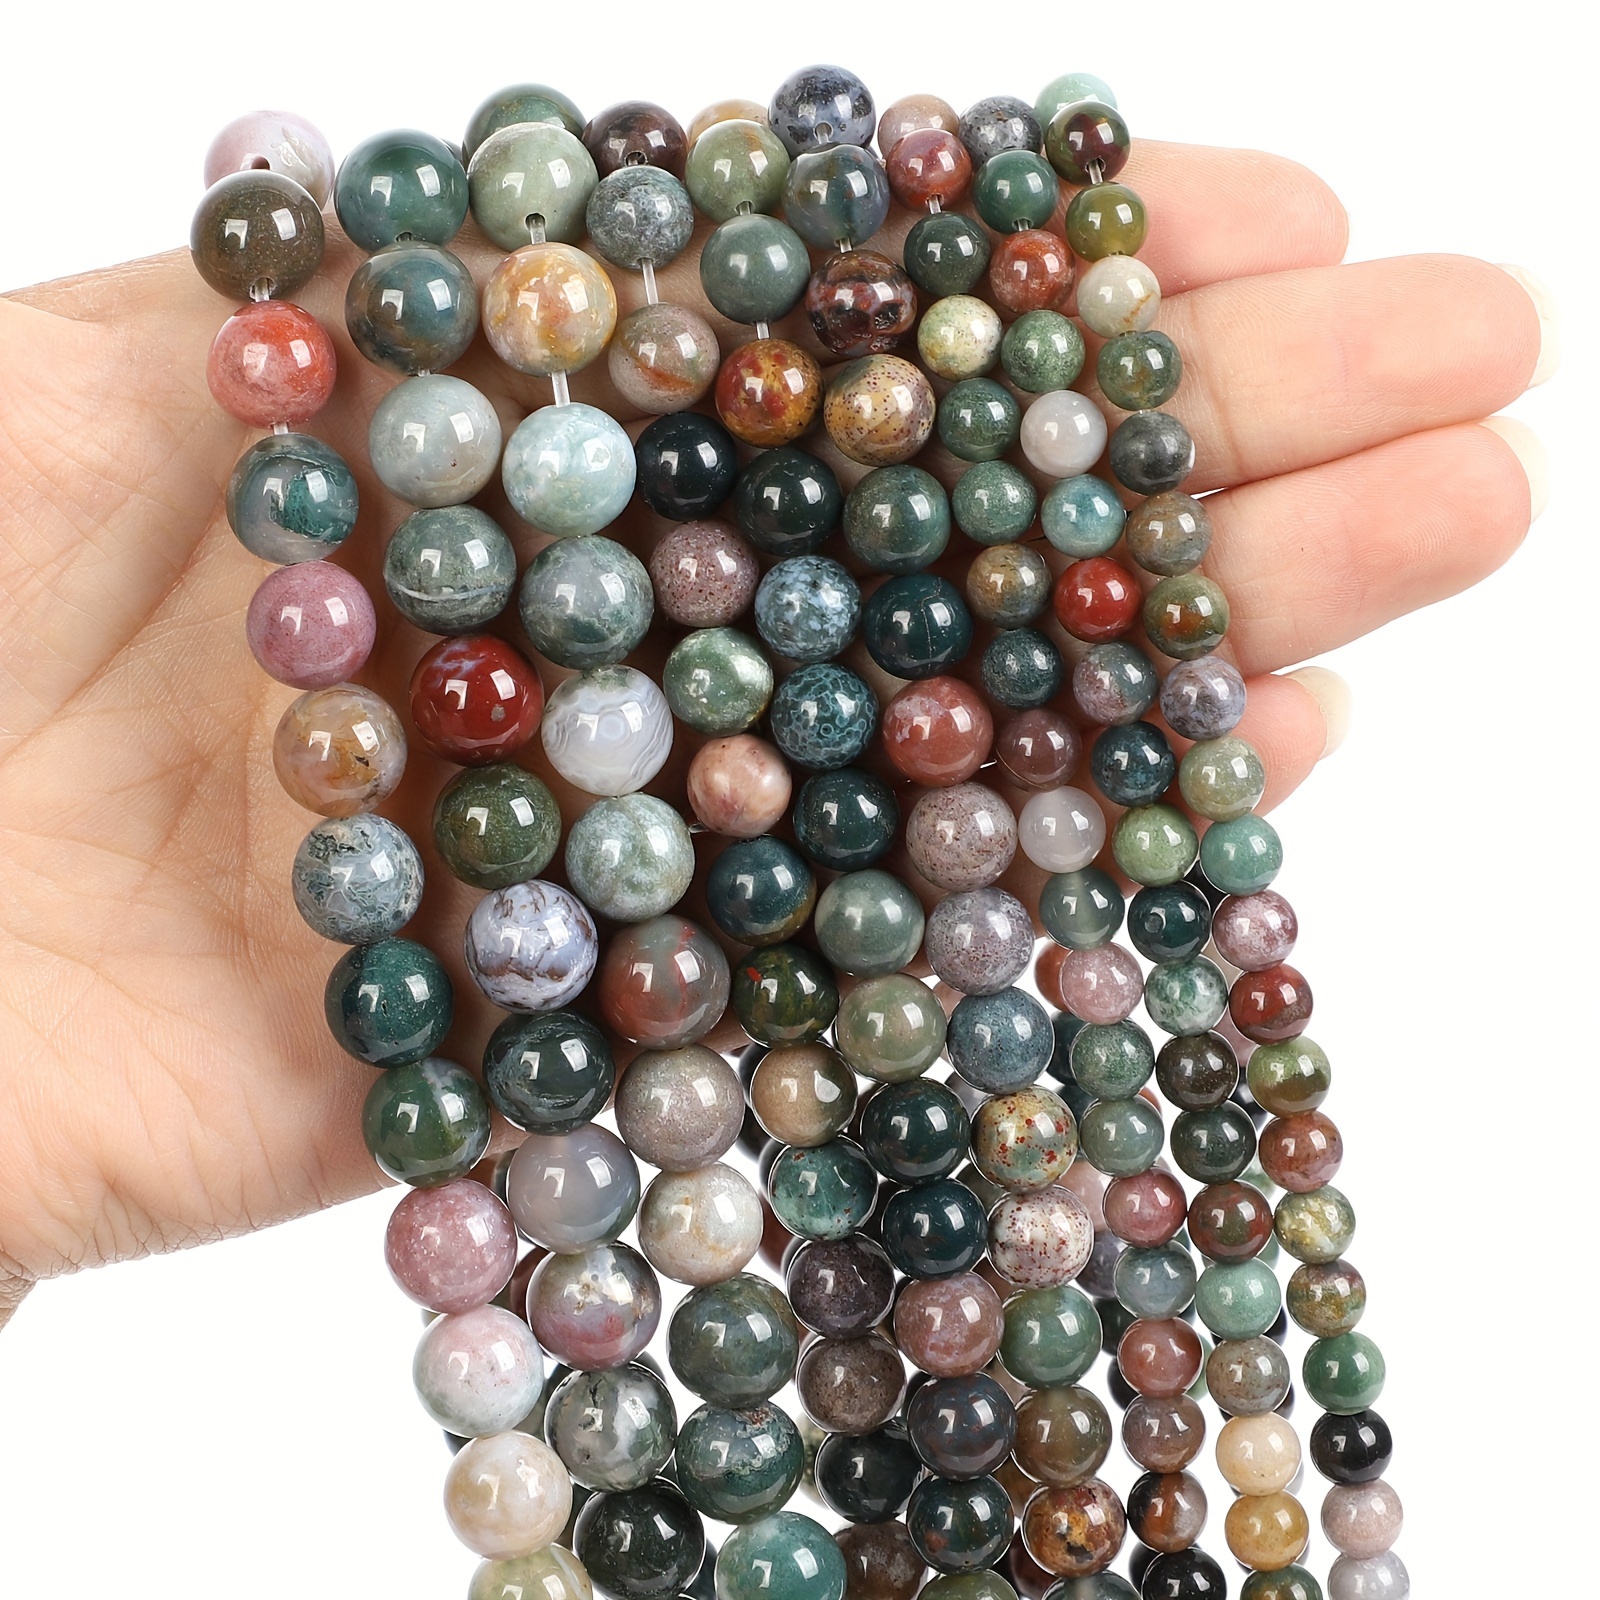 

Natural Indian Agate Stone Round Loose Beads For Jewelry Making Diy Charm Bracelet 4-10mm